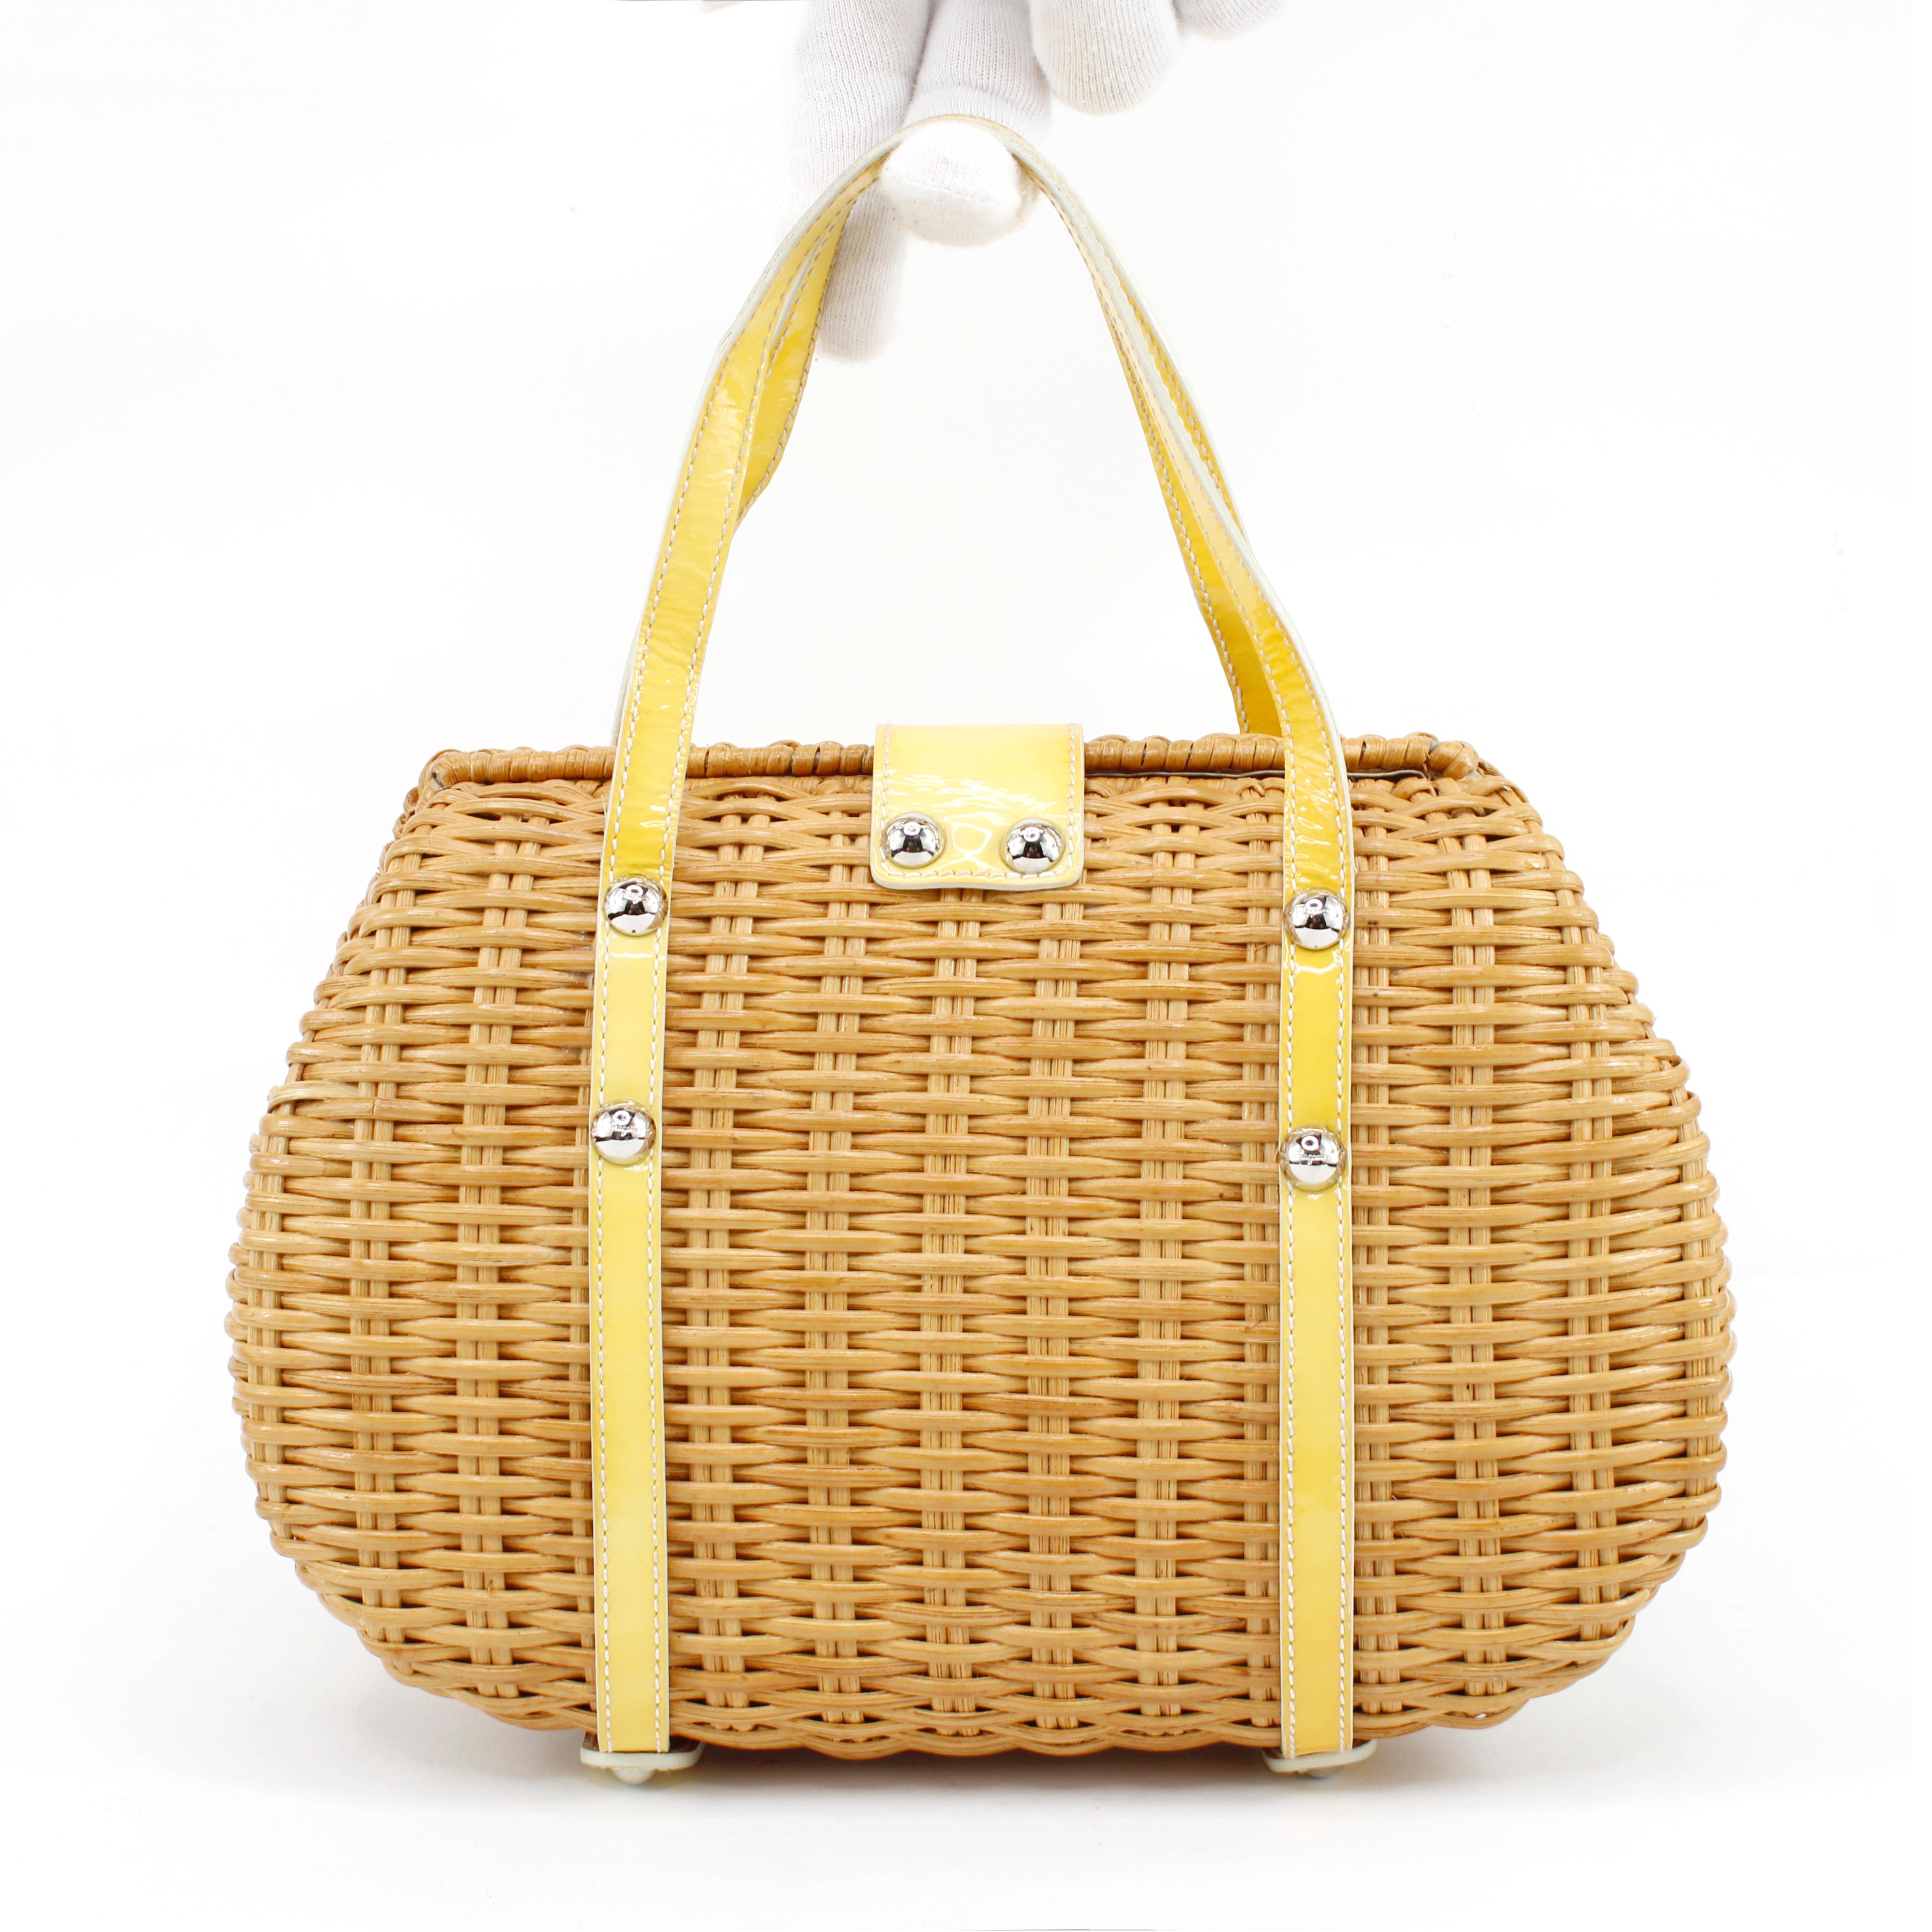 Salvatore Ferragamo bag in wicker + yellow patent leather, silver hardware, internal in silk color champagne. 

Condition: 
Really good.

Measurements: 
Width: 26 cm
Height: 16 cm
Depth: 7 cm